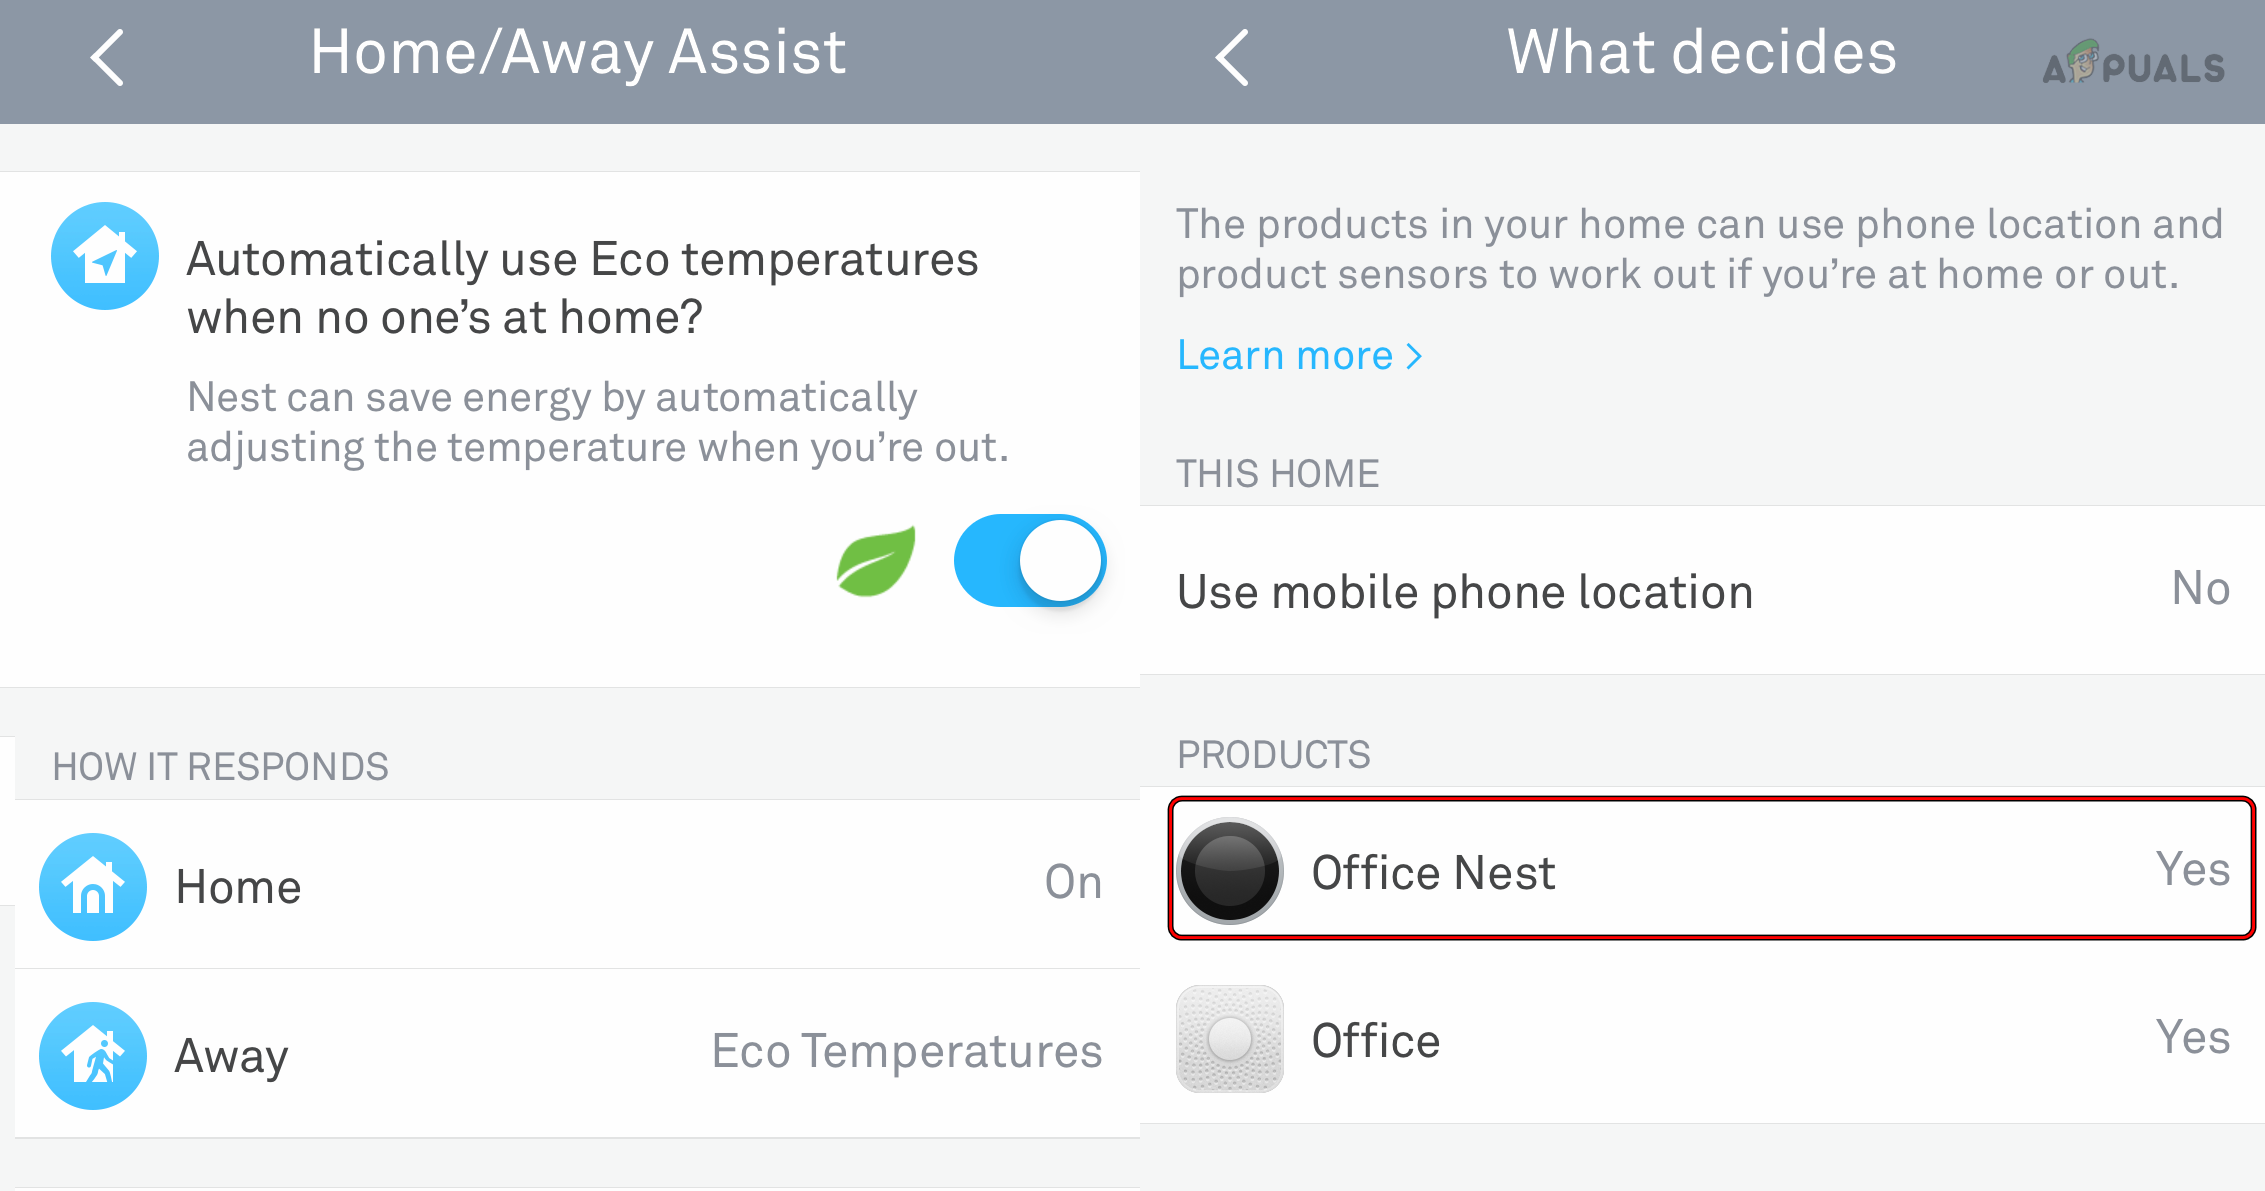 Disable the Nest Thermostat Under Home Awasy Assist Products